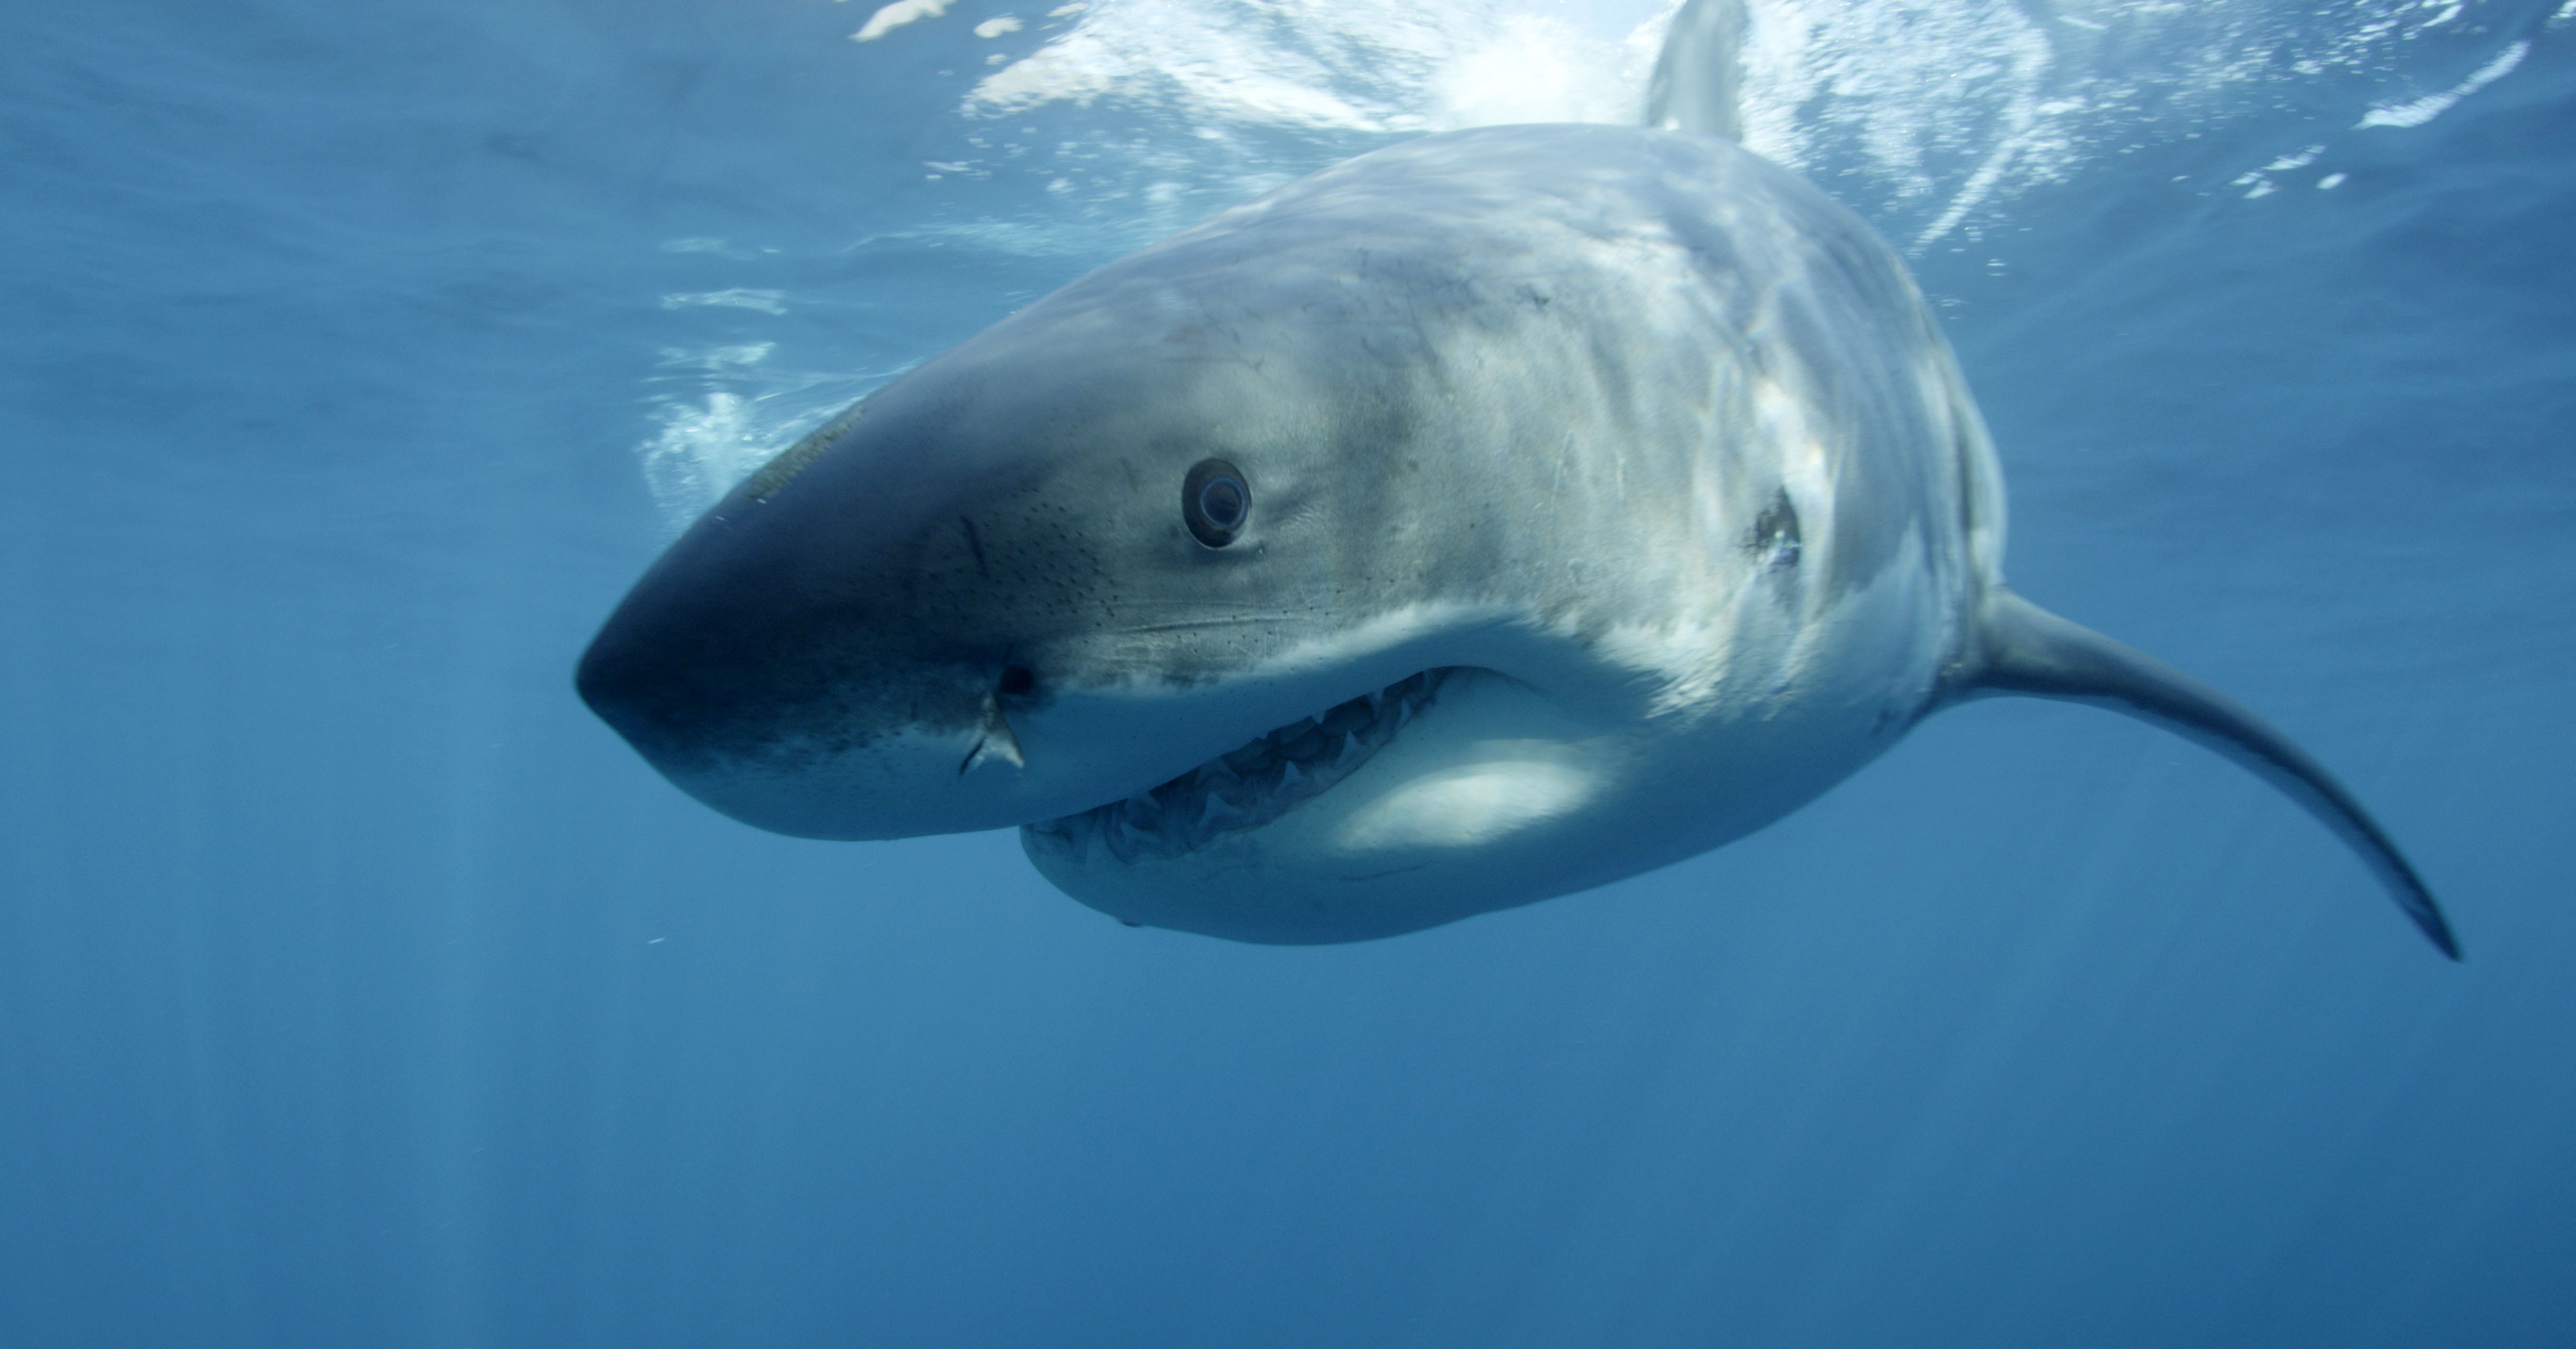 swimmer-killed-by-shark-while-diving-off-australian-coast